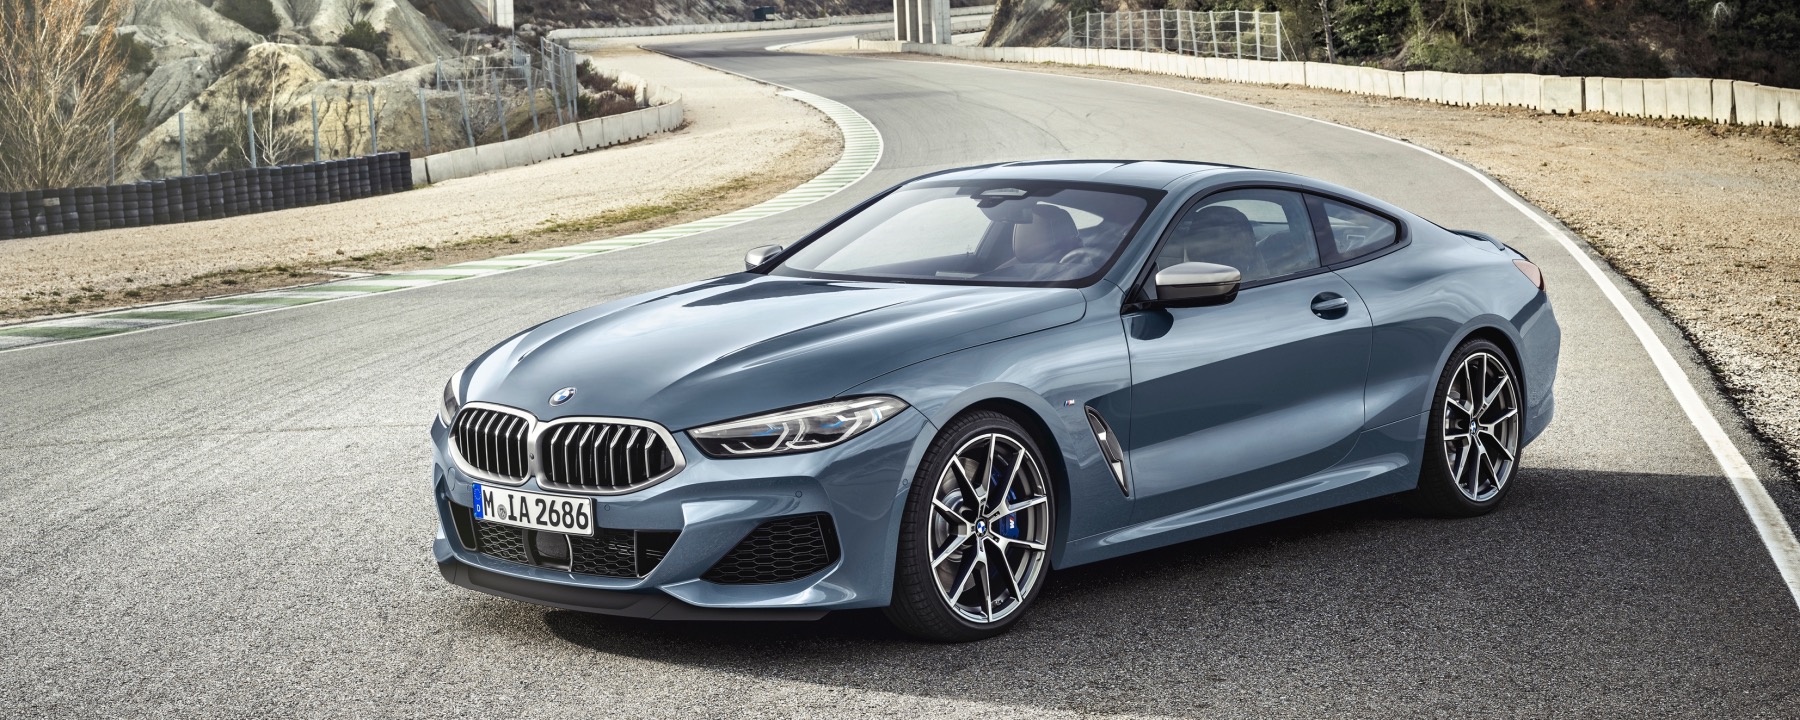 The New BMW 8 Series Coupe Turns Heads - BMW of Palm Springs Blog